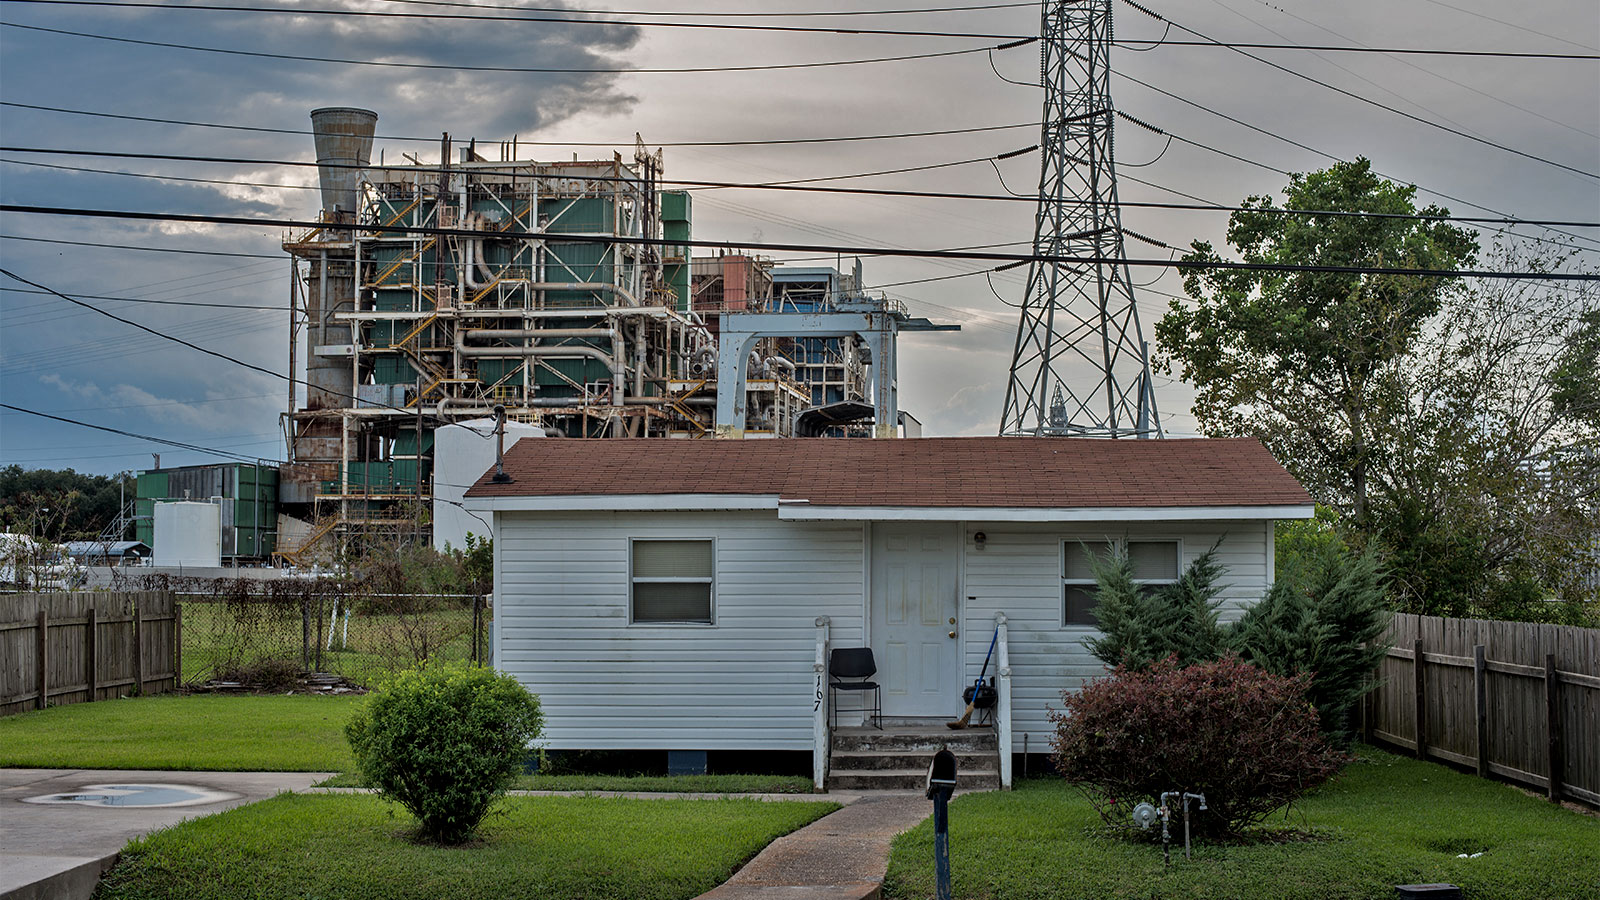 A house in front of a refinery in what is known as 